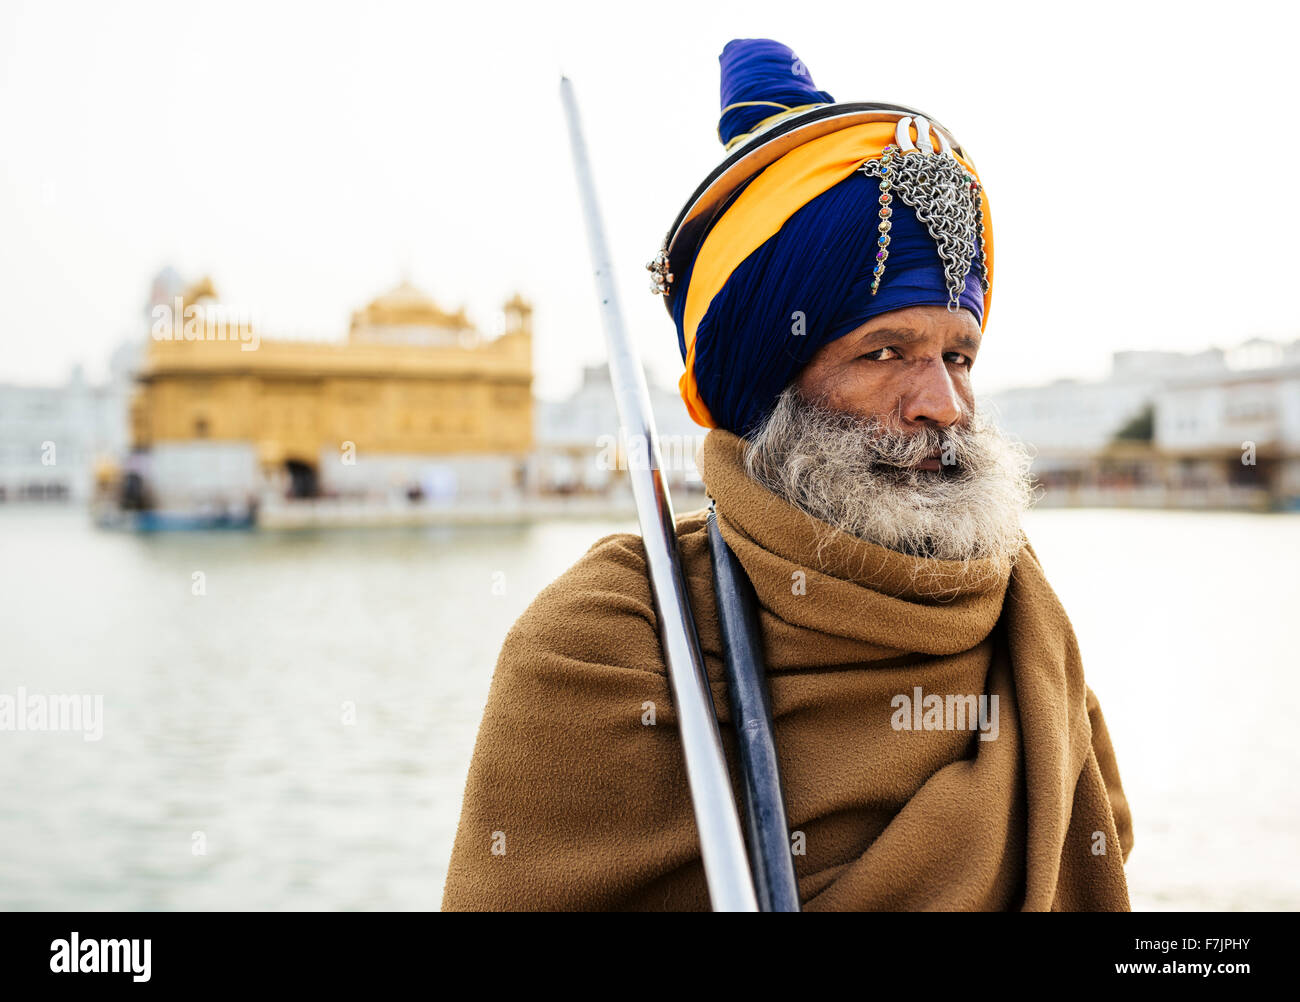 Portrait of a Sikh guard holding a spear, Golden Temple, Amritsar, Punjab, India Stock Photo